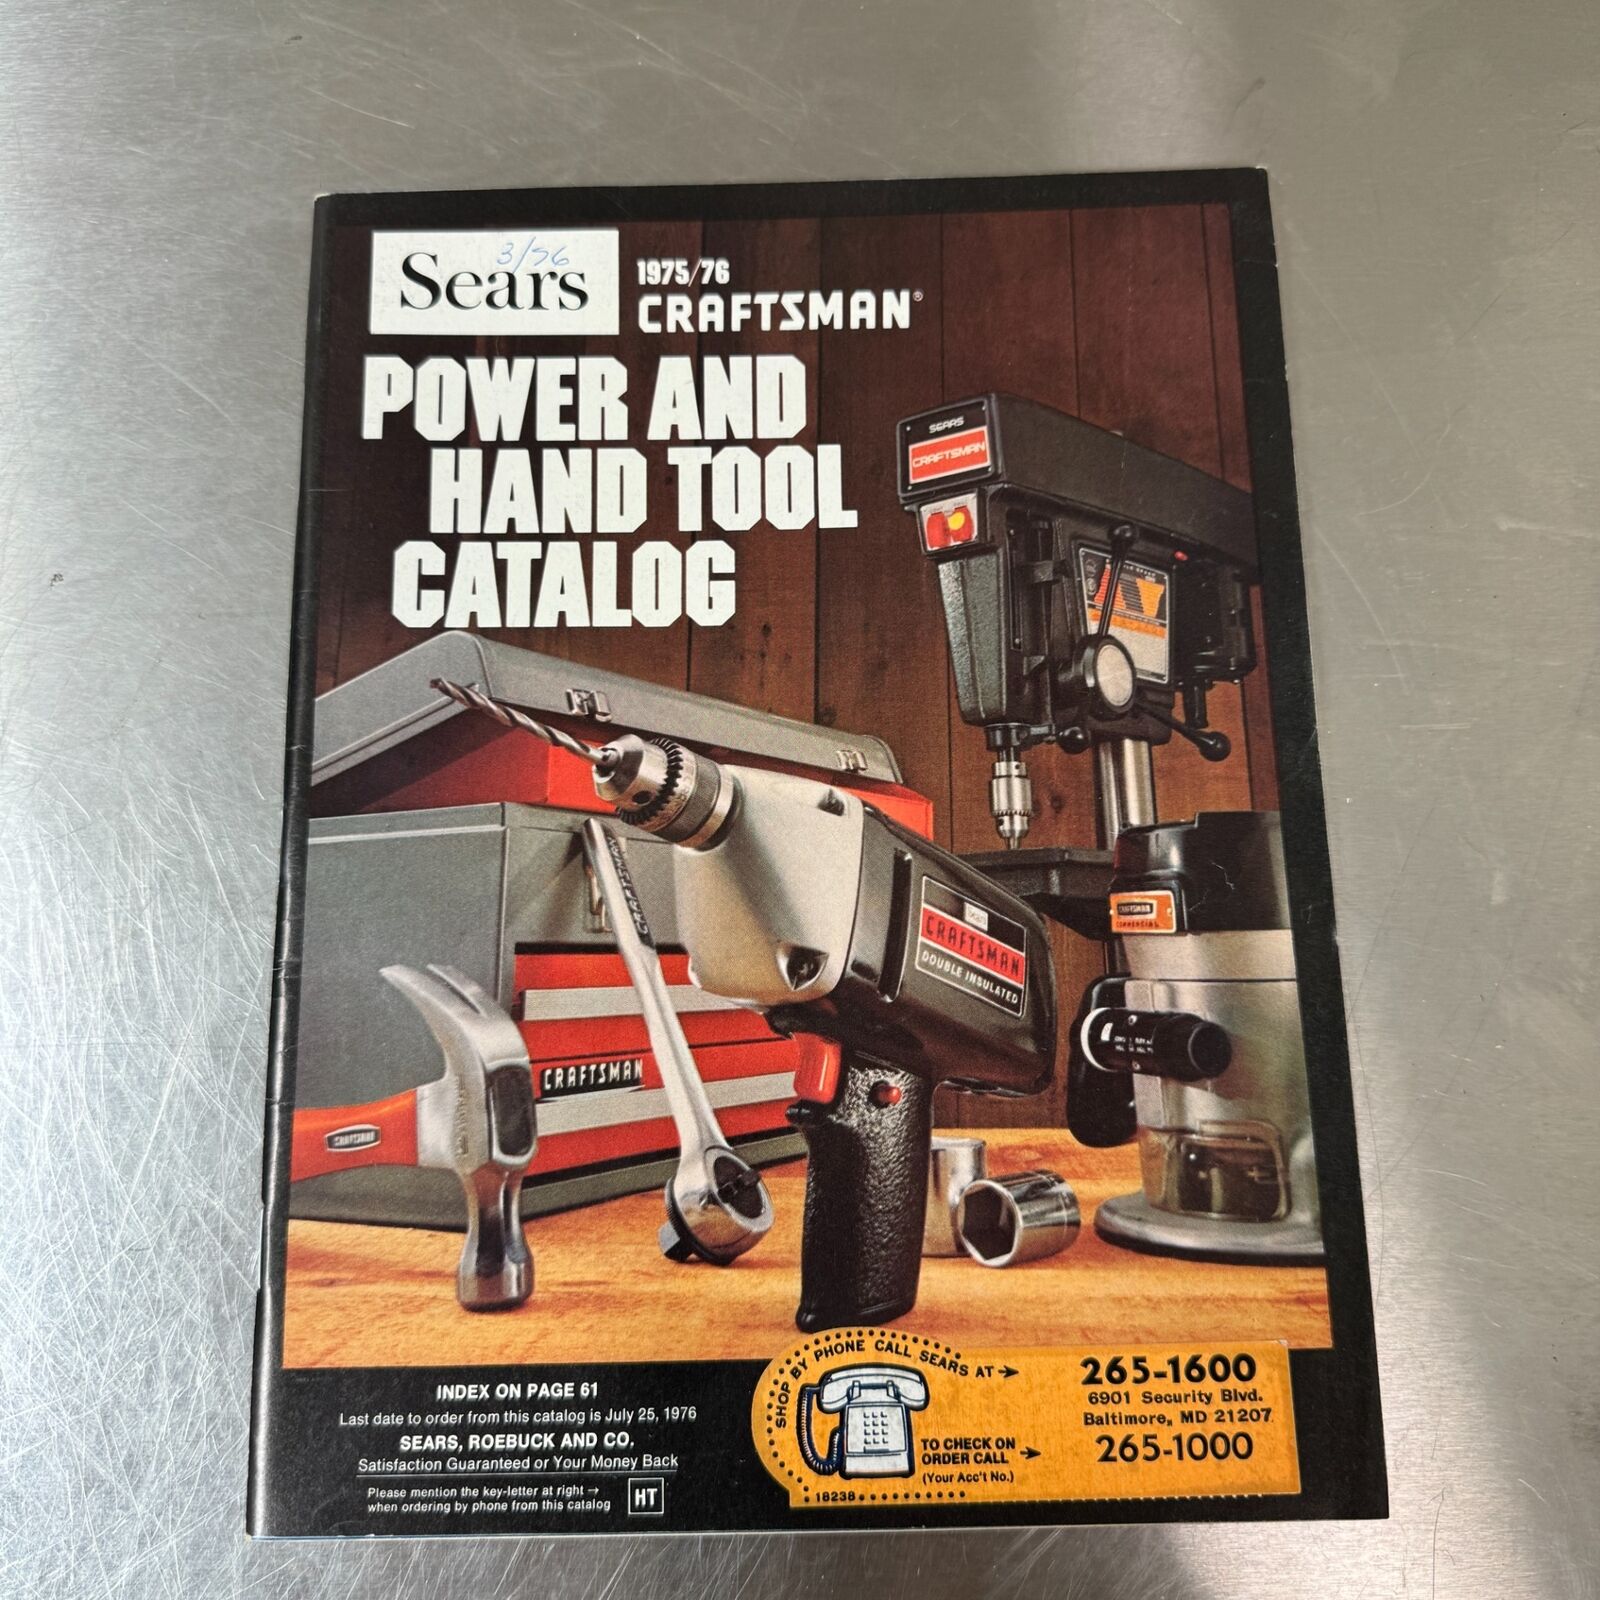 Vintage SEARS Craftsman Power and Hand Tool Catalog 1975 / 1976